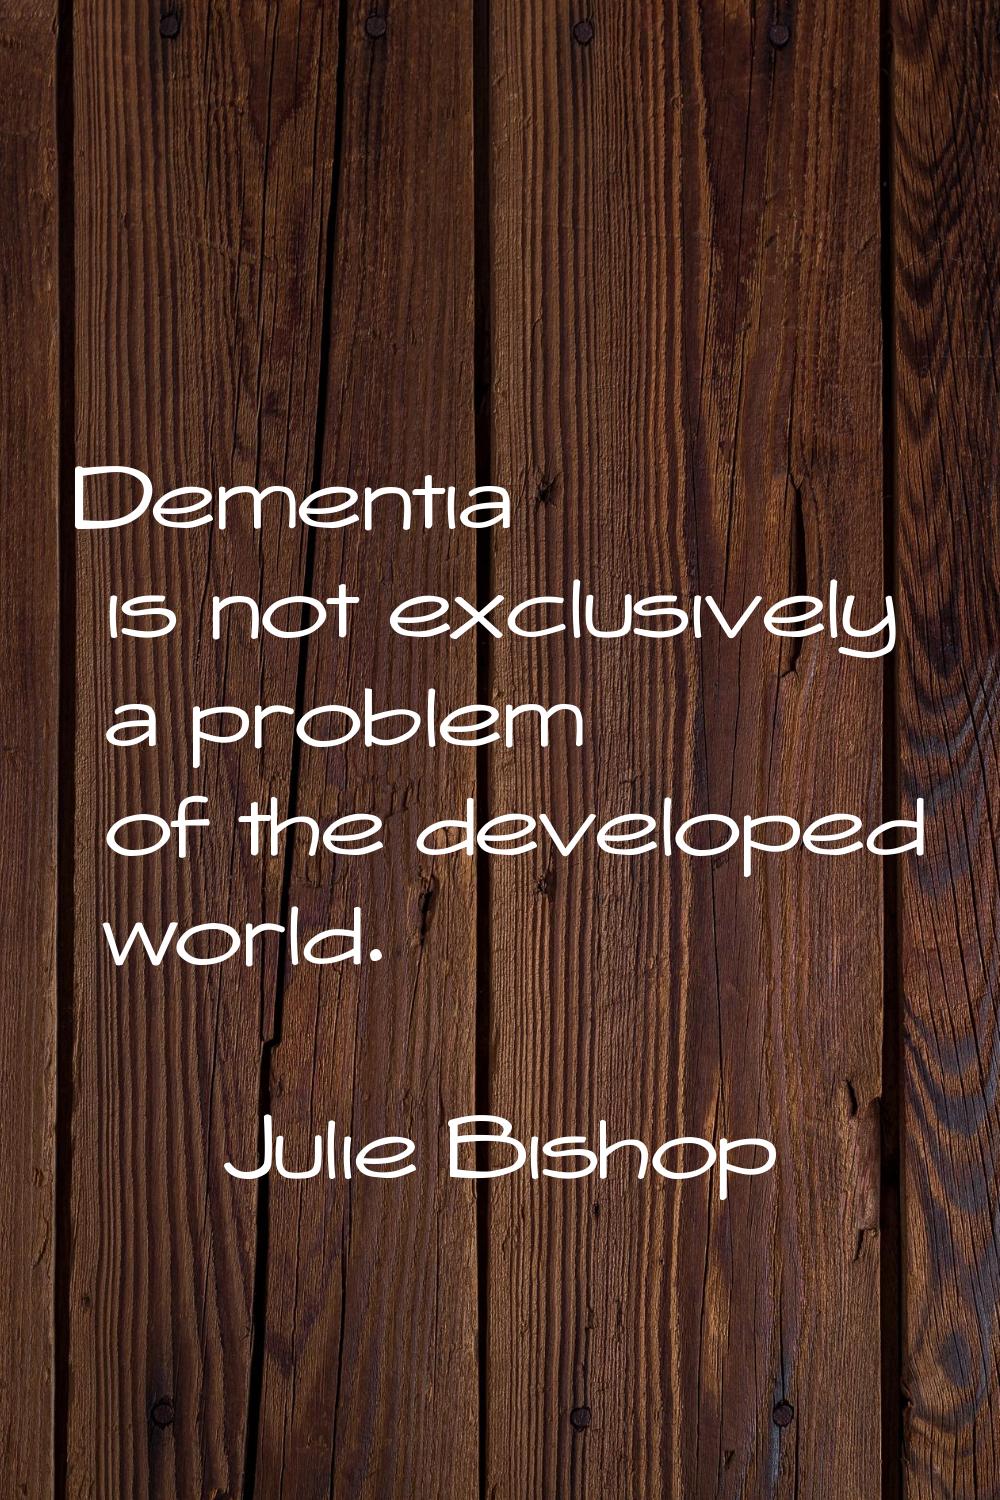 Dementia is not exclusively a problem of the developed world.